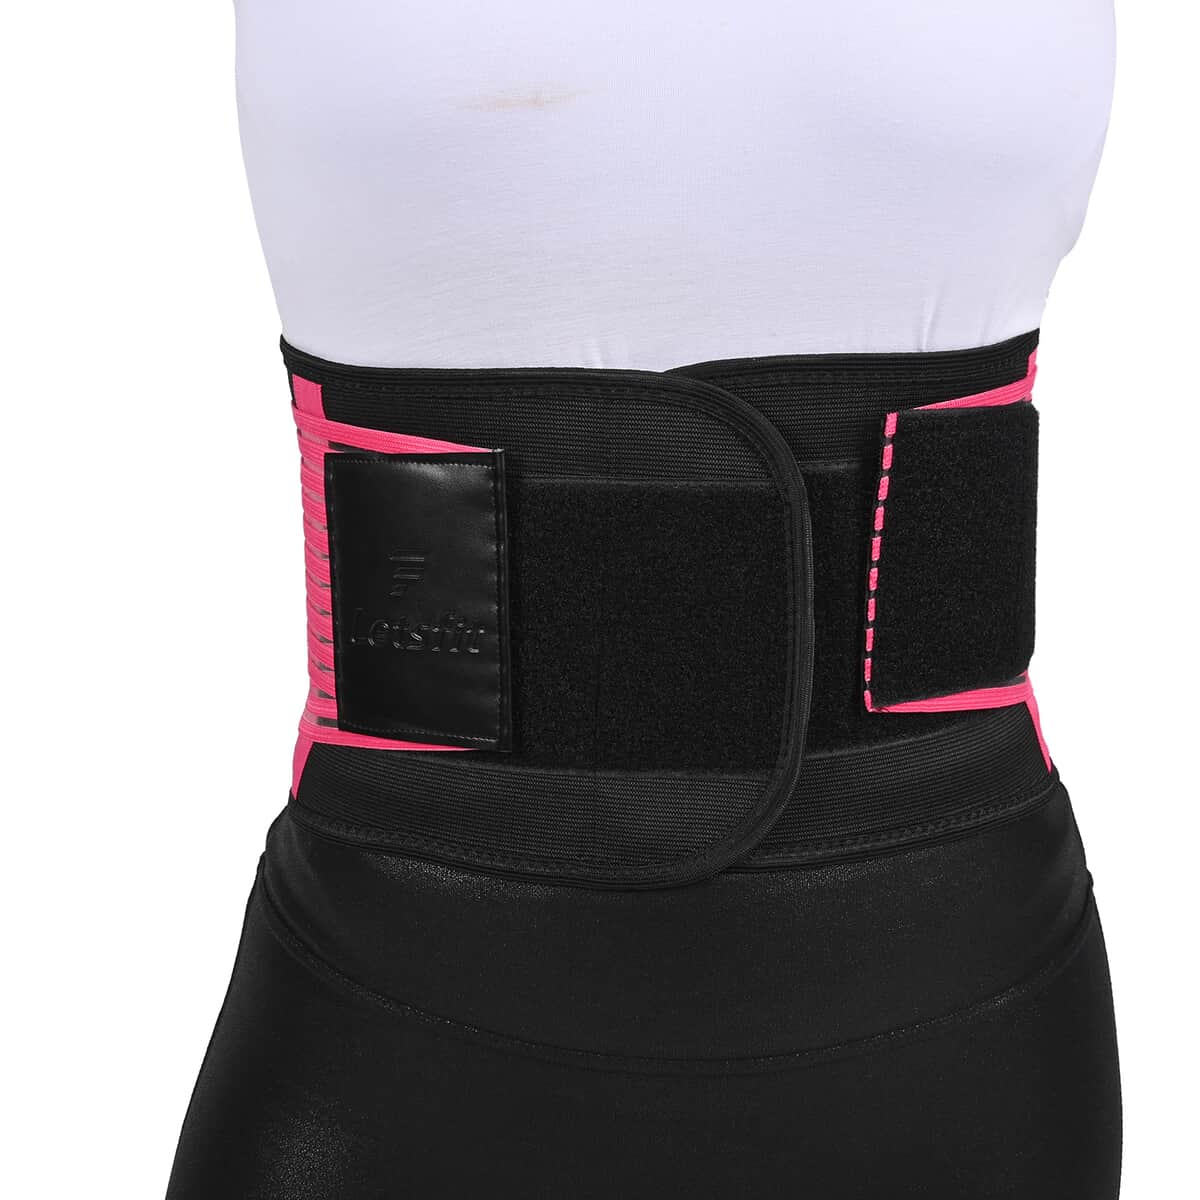 Letsfit Pink Waist Trainer Lumber Support Belt with Measuring Tape - M image number 3